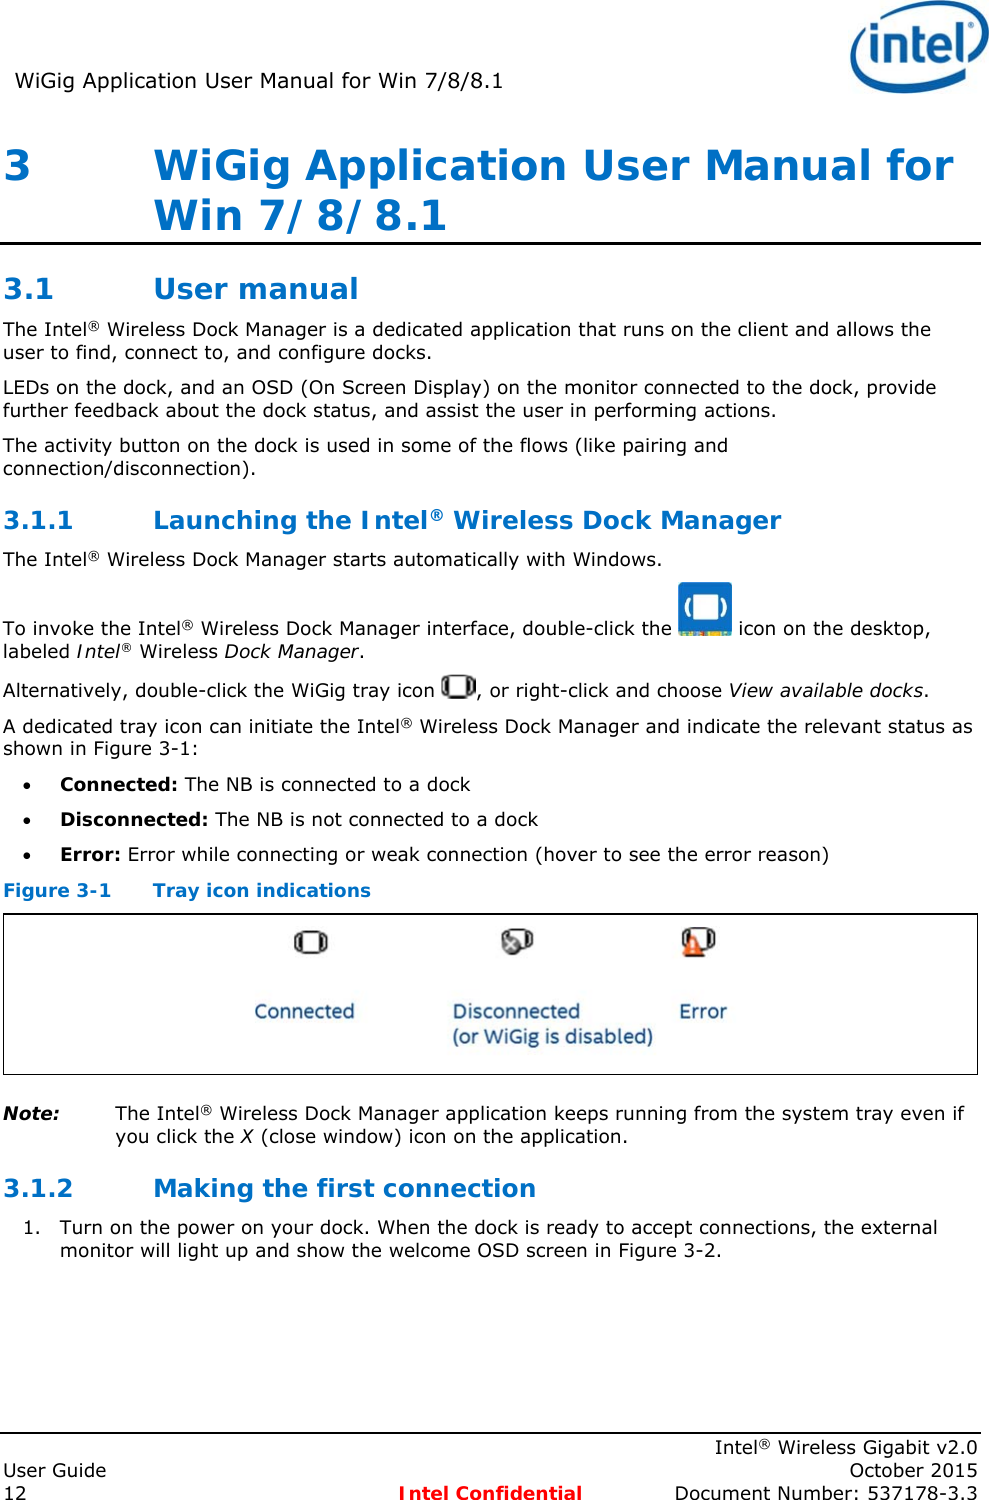 WiGig Application User Manual for Win 7/8/8.1      Intel® Wireless Gigabit v2.0 User Guide    October 2015 12 Intel Confidential  Document Number: 537178-3.3 3   WiGig Application User Manual for Win 7/8/8.1 3.1 User manual  The Intel® Wireless Dock Manager is a dedicated application that runs on the client and allows the user to find, connect to, and configure docks. LEDs on the dock, and an OSD (On Screen Display) on the monitor connected to the dock, provide further feedback about the dock status, and assist the user in performing actions. The activity button on the dock is used in some of the flows (like pairing and connection/disconnection). 3.1.1 Launching the Intel® Wireless Dock Manager The Intel® Wireless Dock Manager starts automatically with Windows. To invoke the Intel® Wireless Dock Manager interface, double-click the   icon on the desktop, labeled Intel® Wireless Dock Manager. Alternatively, double-click the WiGig tray icon  , or right-click and choose View available docks. A dedicated tray icon can initiate the Intel® Wireless Dock Manager and indicate the relevant status as shown in Figure 3-1:  Connected: The NB is connected to a dock  Disconnected: The NB is not connected to a dock  Error: Error while connecting or weak connection (hover to see the error reason) Figure 3-1  Tray icon indications  Note: The Intel® Wireless Dock Manager application keeps running from the system tray even if you click the X (close window) icon on the application. 3.1.2 Making the first connection 1. Turn on the power on your dock. When the dock is ready to accept connections, the external monitor will light up and show the welcome OSD screen in Figure 3-2. 